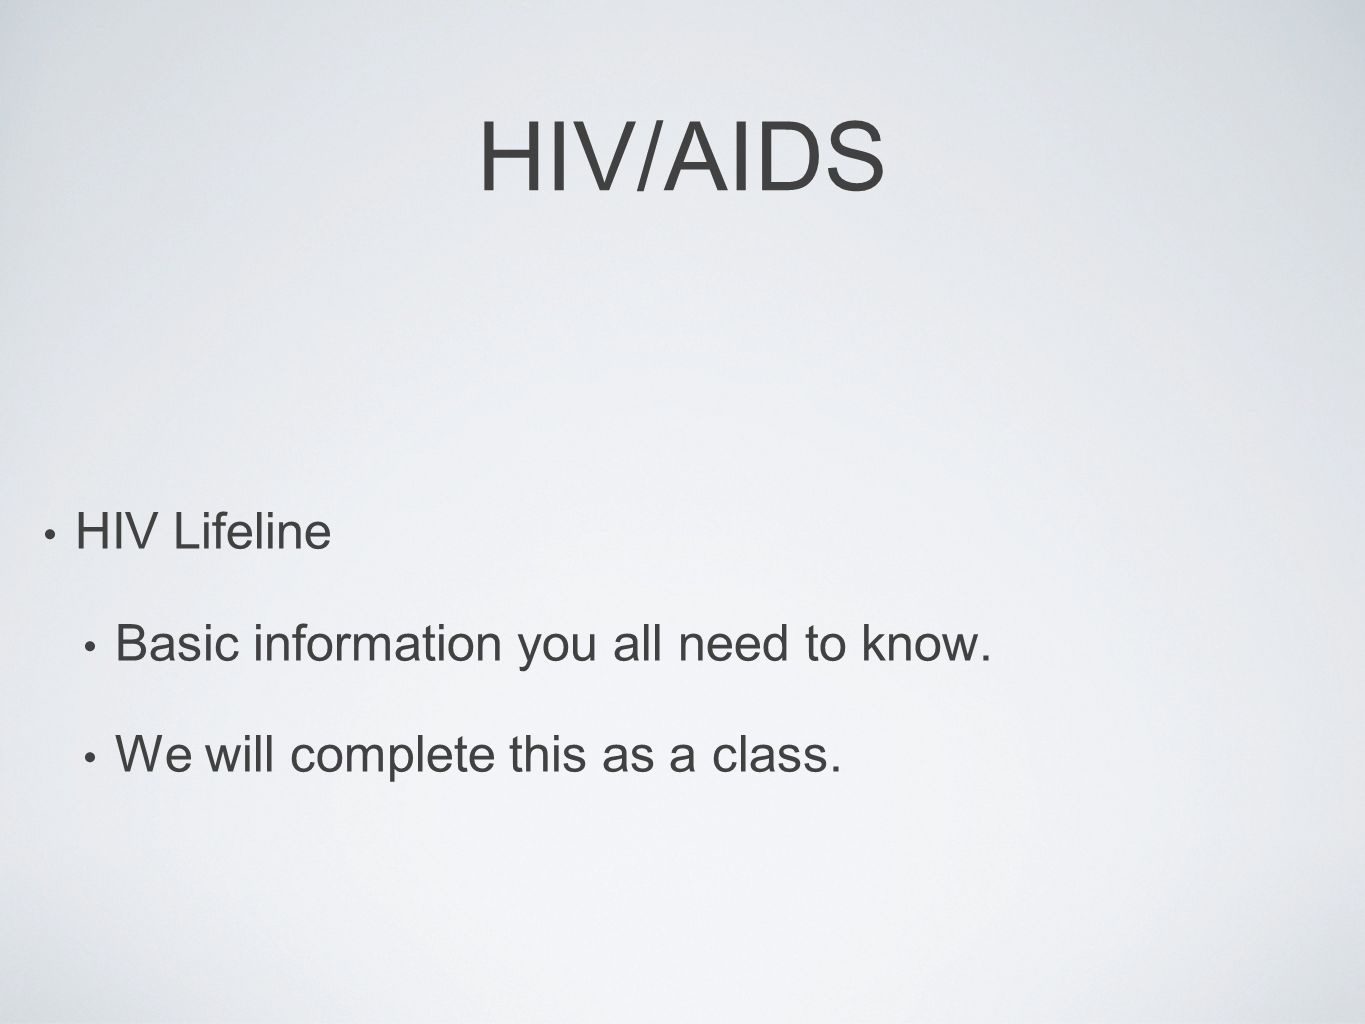 HIV/AIDS HIV Lifeline Basic information you all need to know.